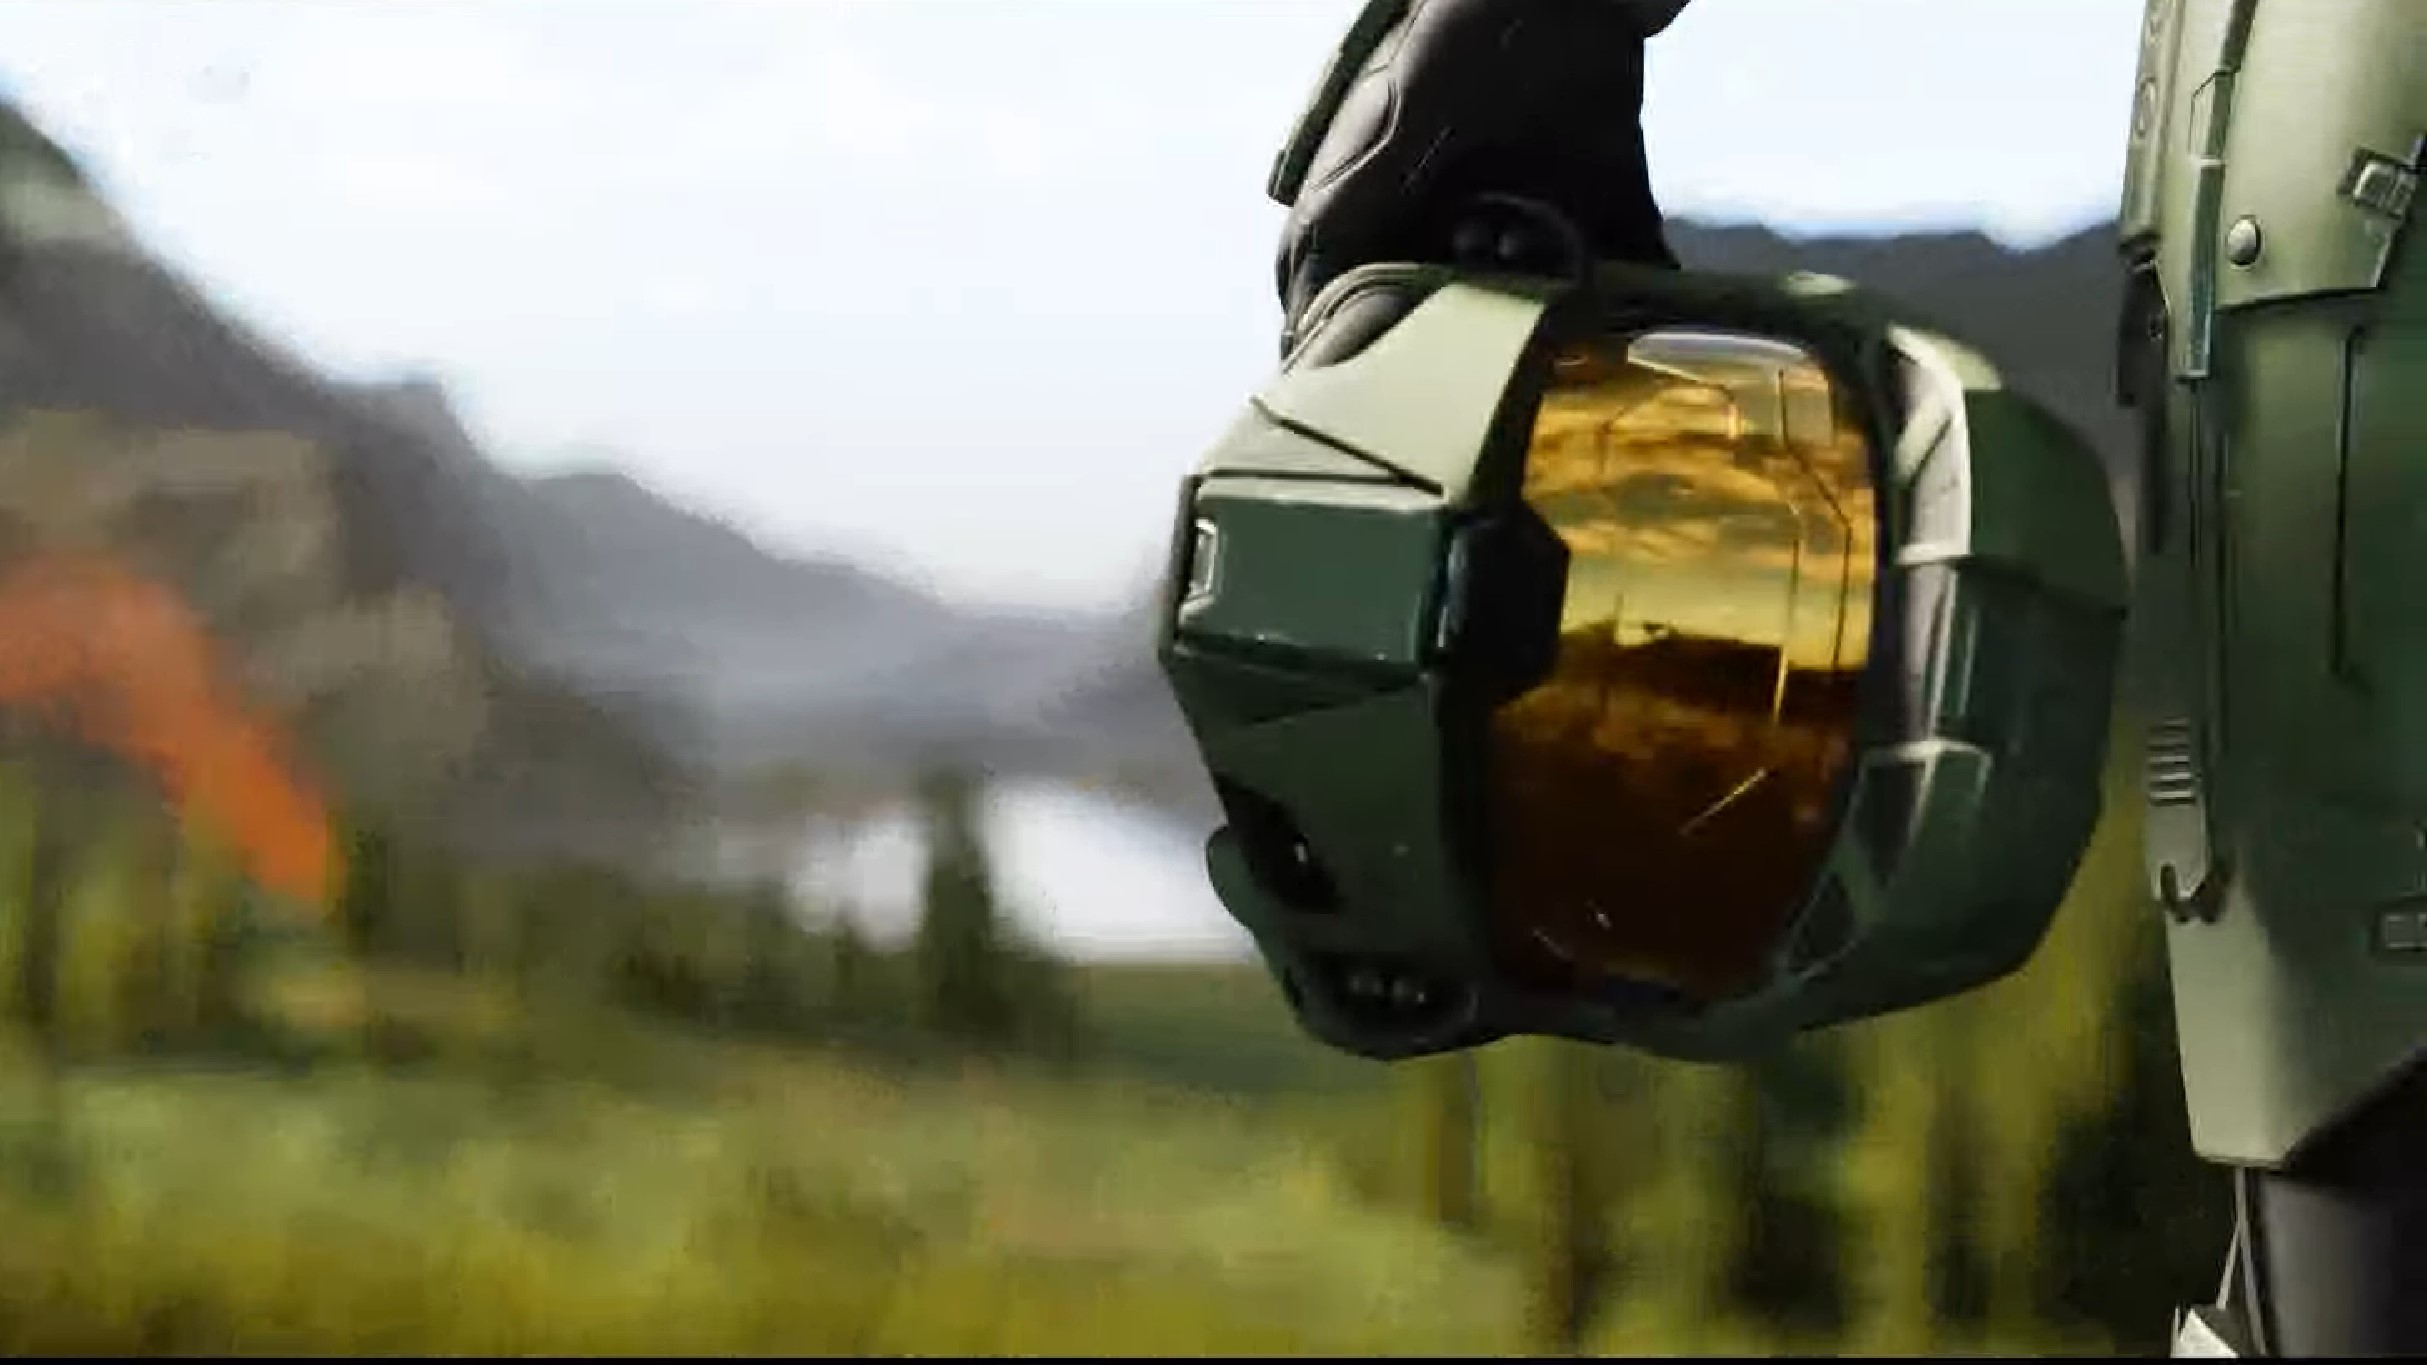 new halo game release date